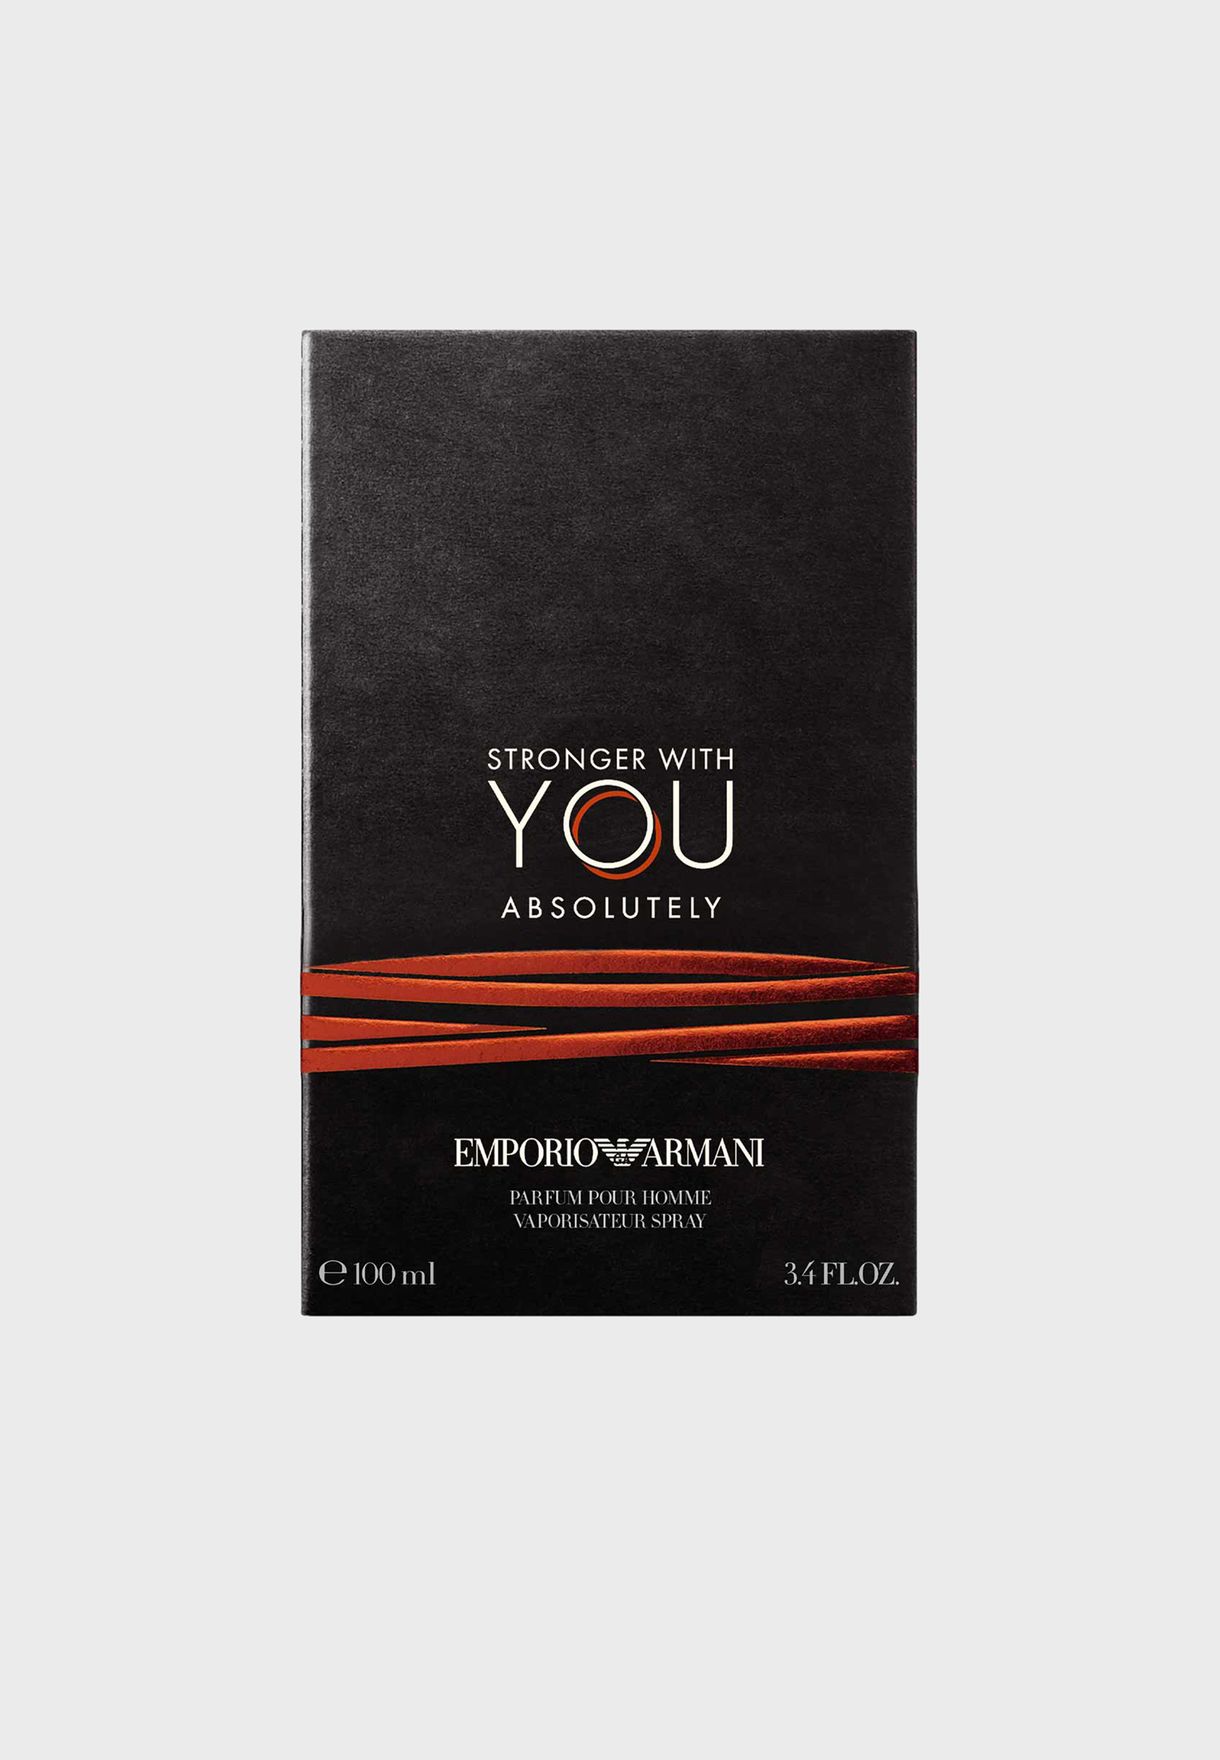 Emporio Armani Stronger With You Intensely By Giorgio Armani Perfume Facts  